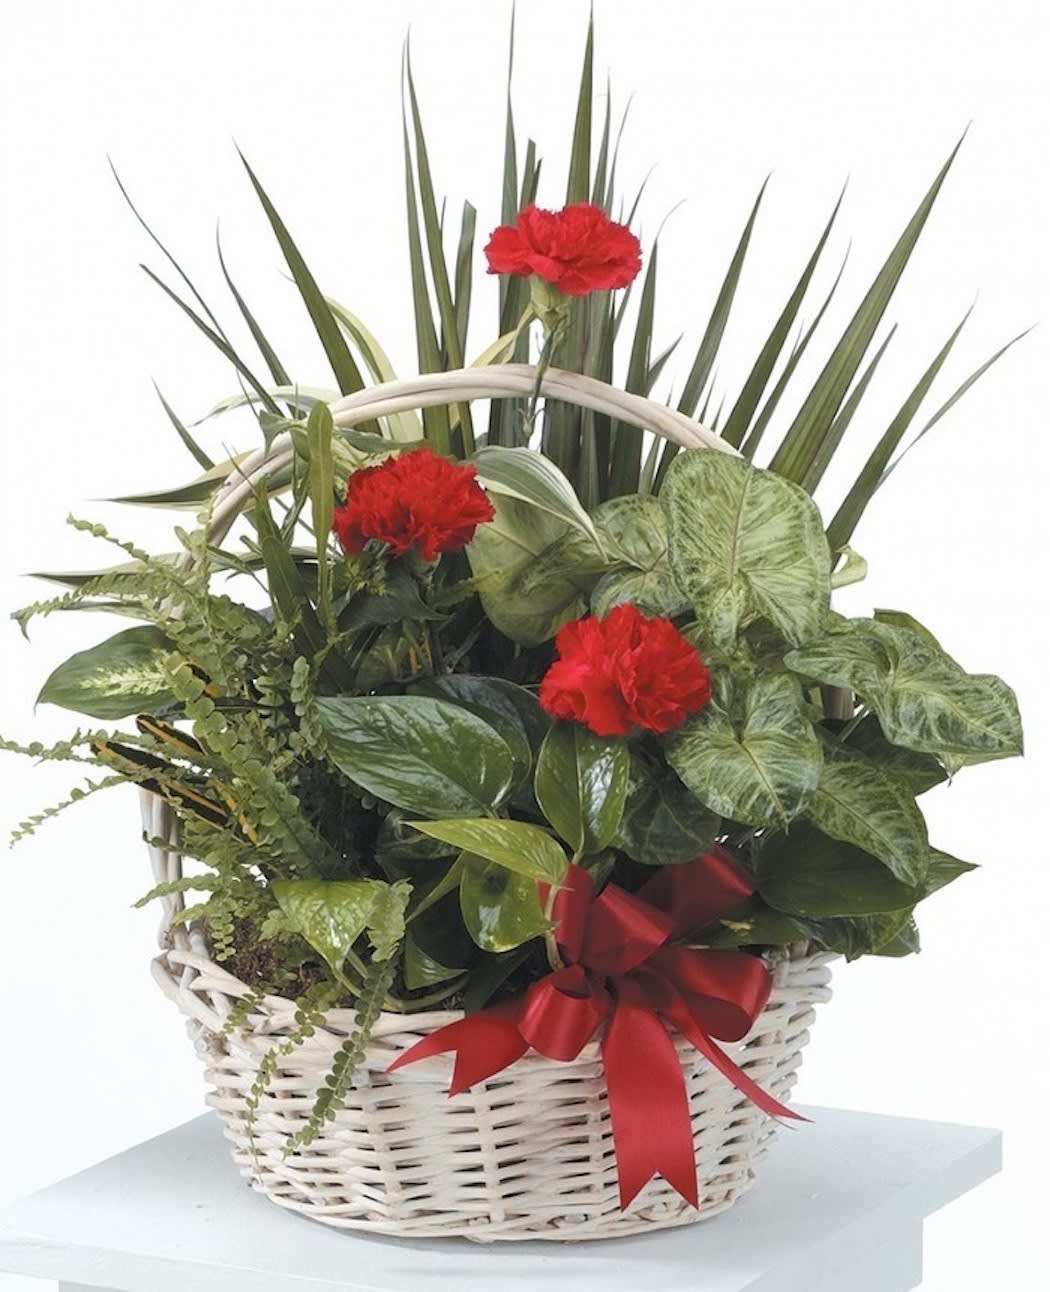 Red Splendor Garden - A very nice garden basket of plants complimented with 3 red carnations (color choice can be made) and a complimenting bow.